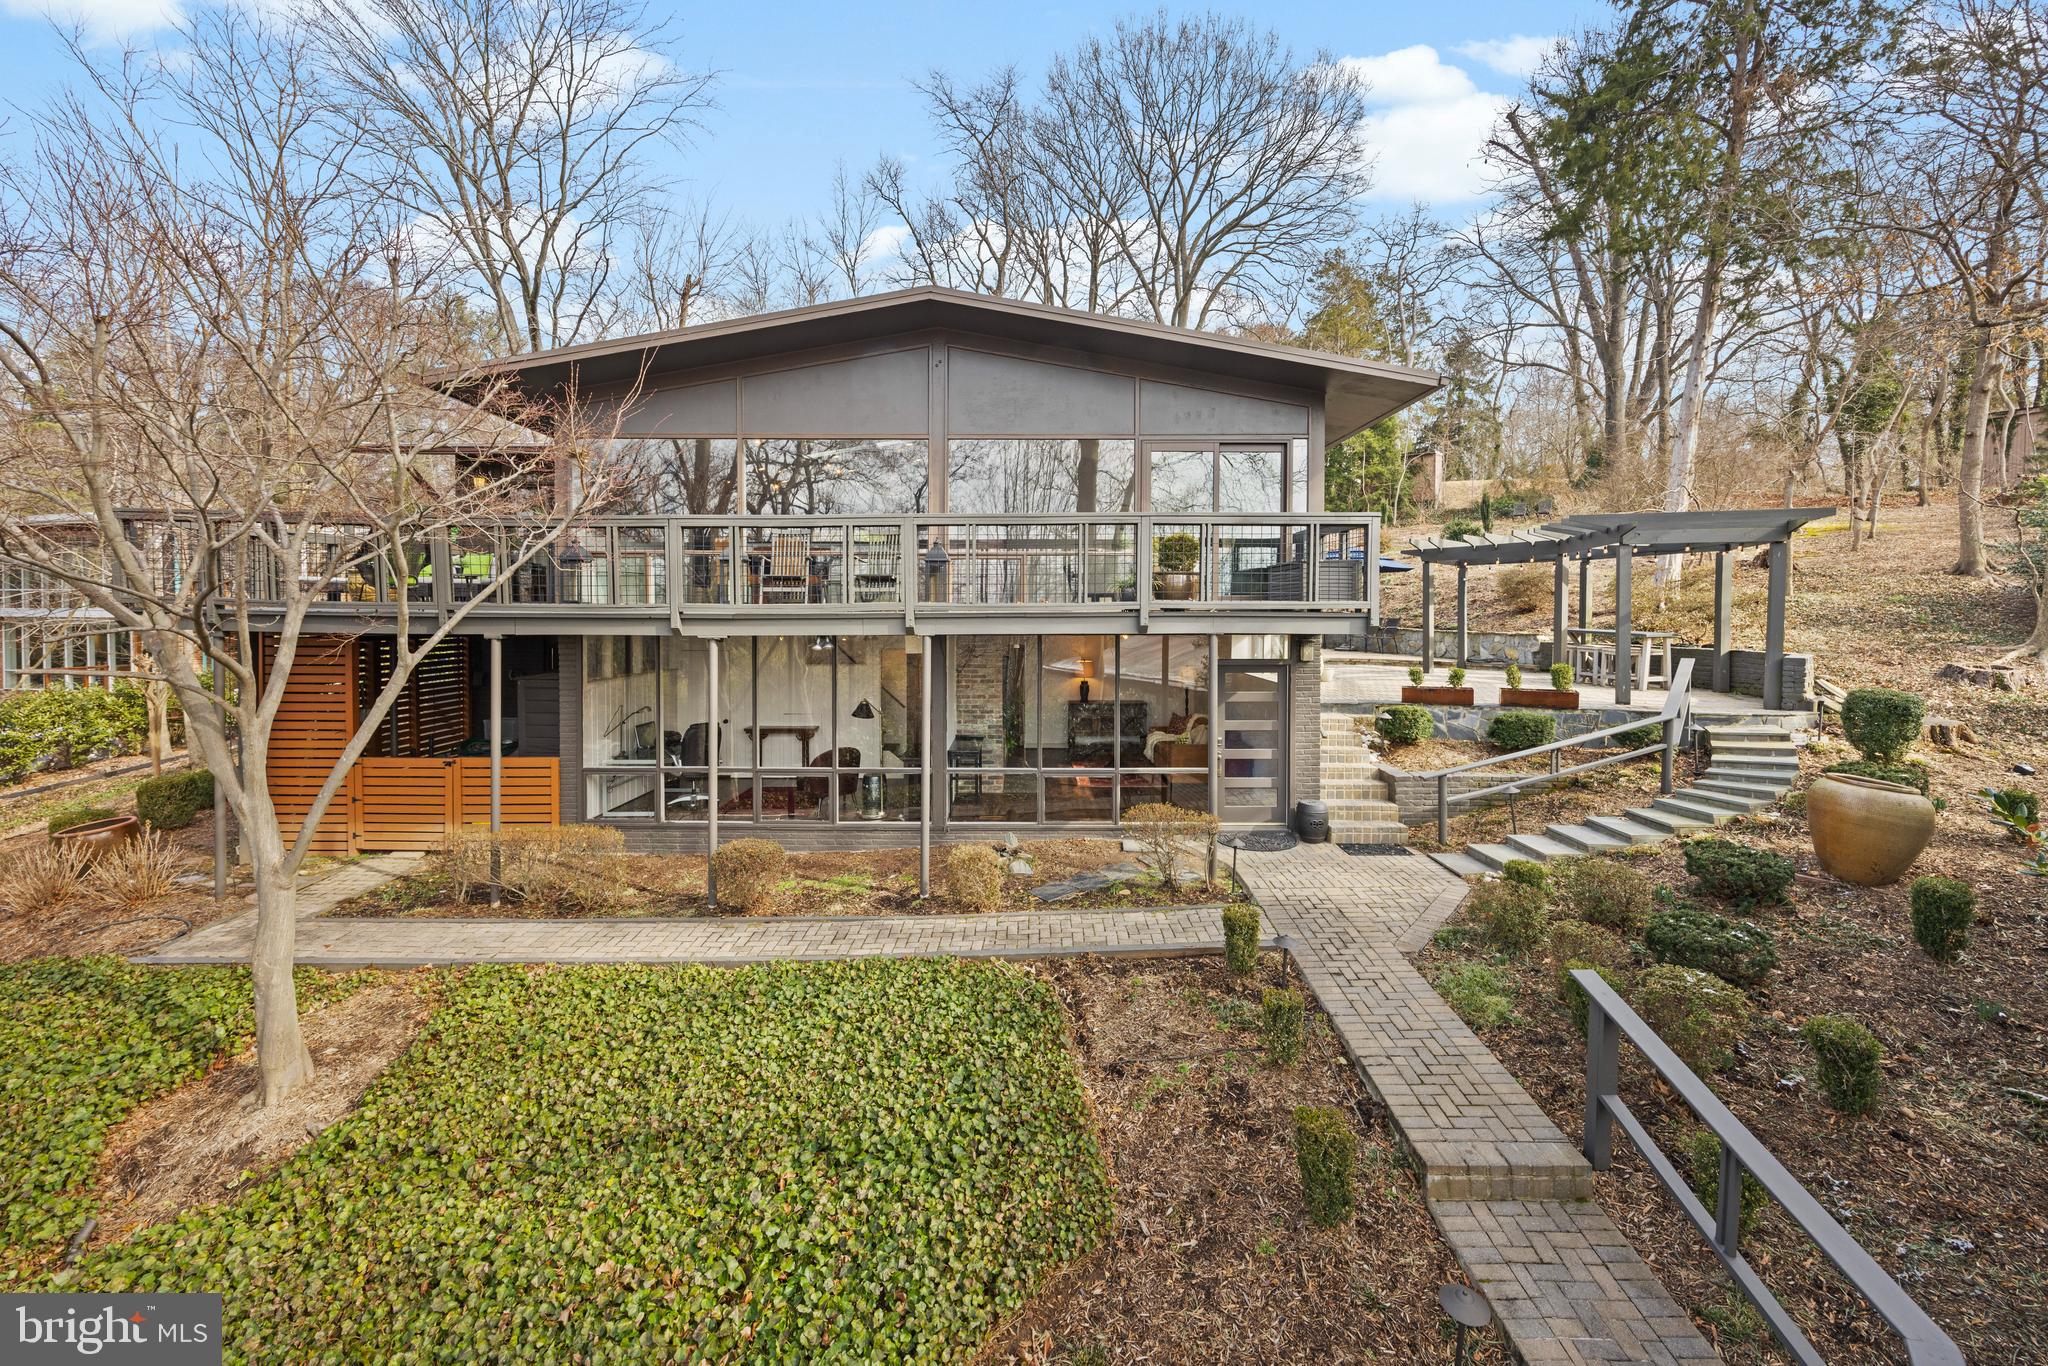 Artfully one of the best offerings in Hollin Hills.  This contemporary  2 level mid-century modern h